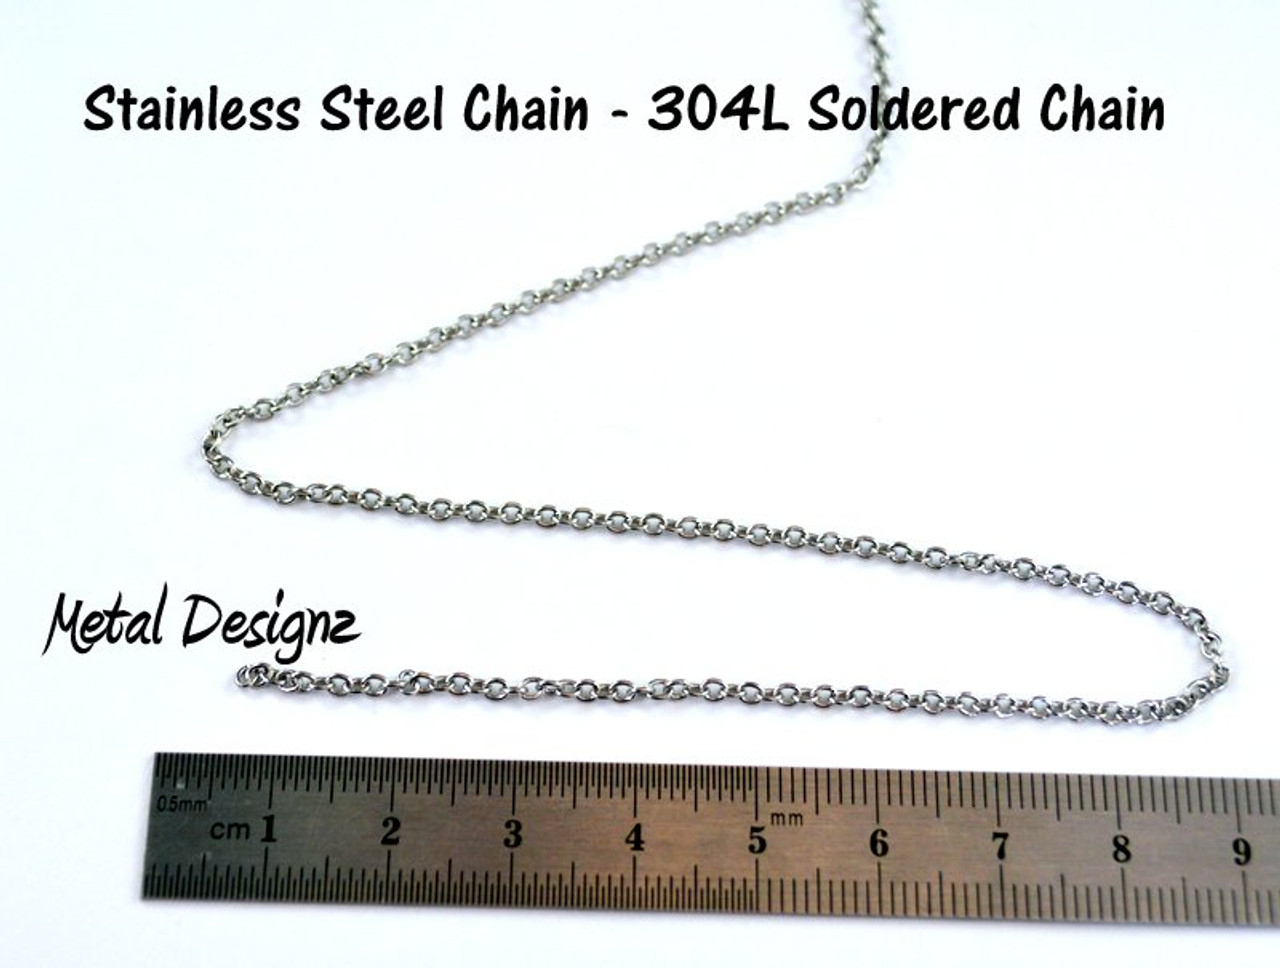 Stainless Steel Ball Chain - 50 Foot Spool - Metal Designz